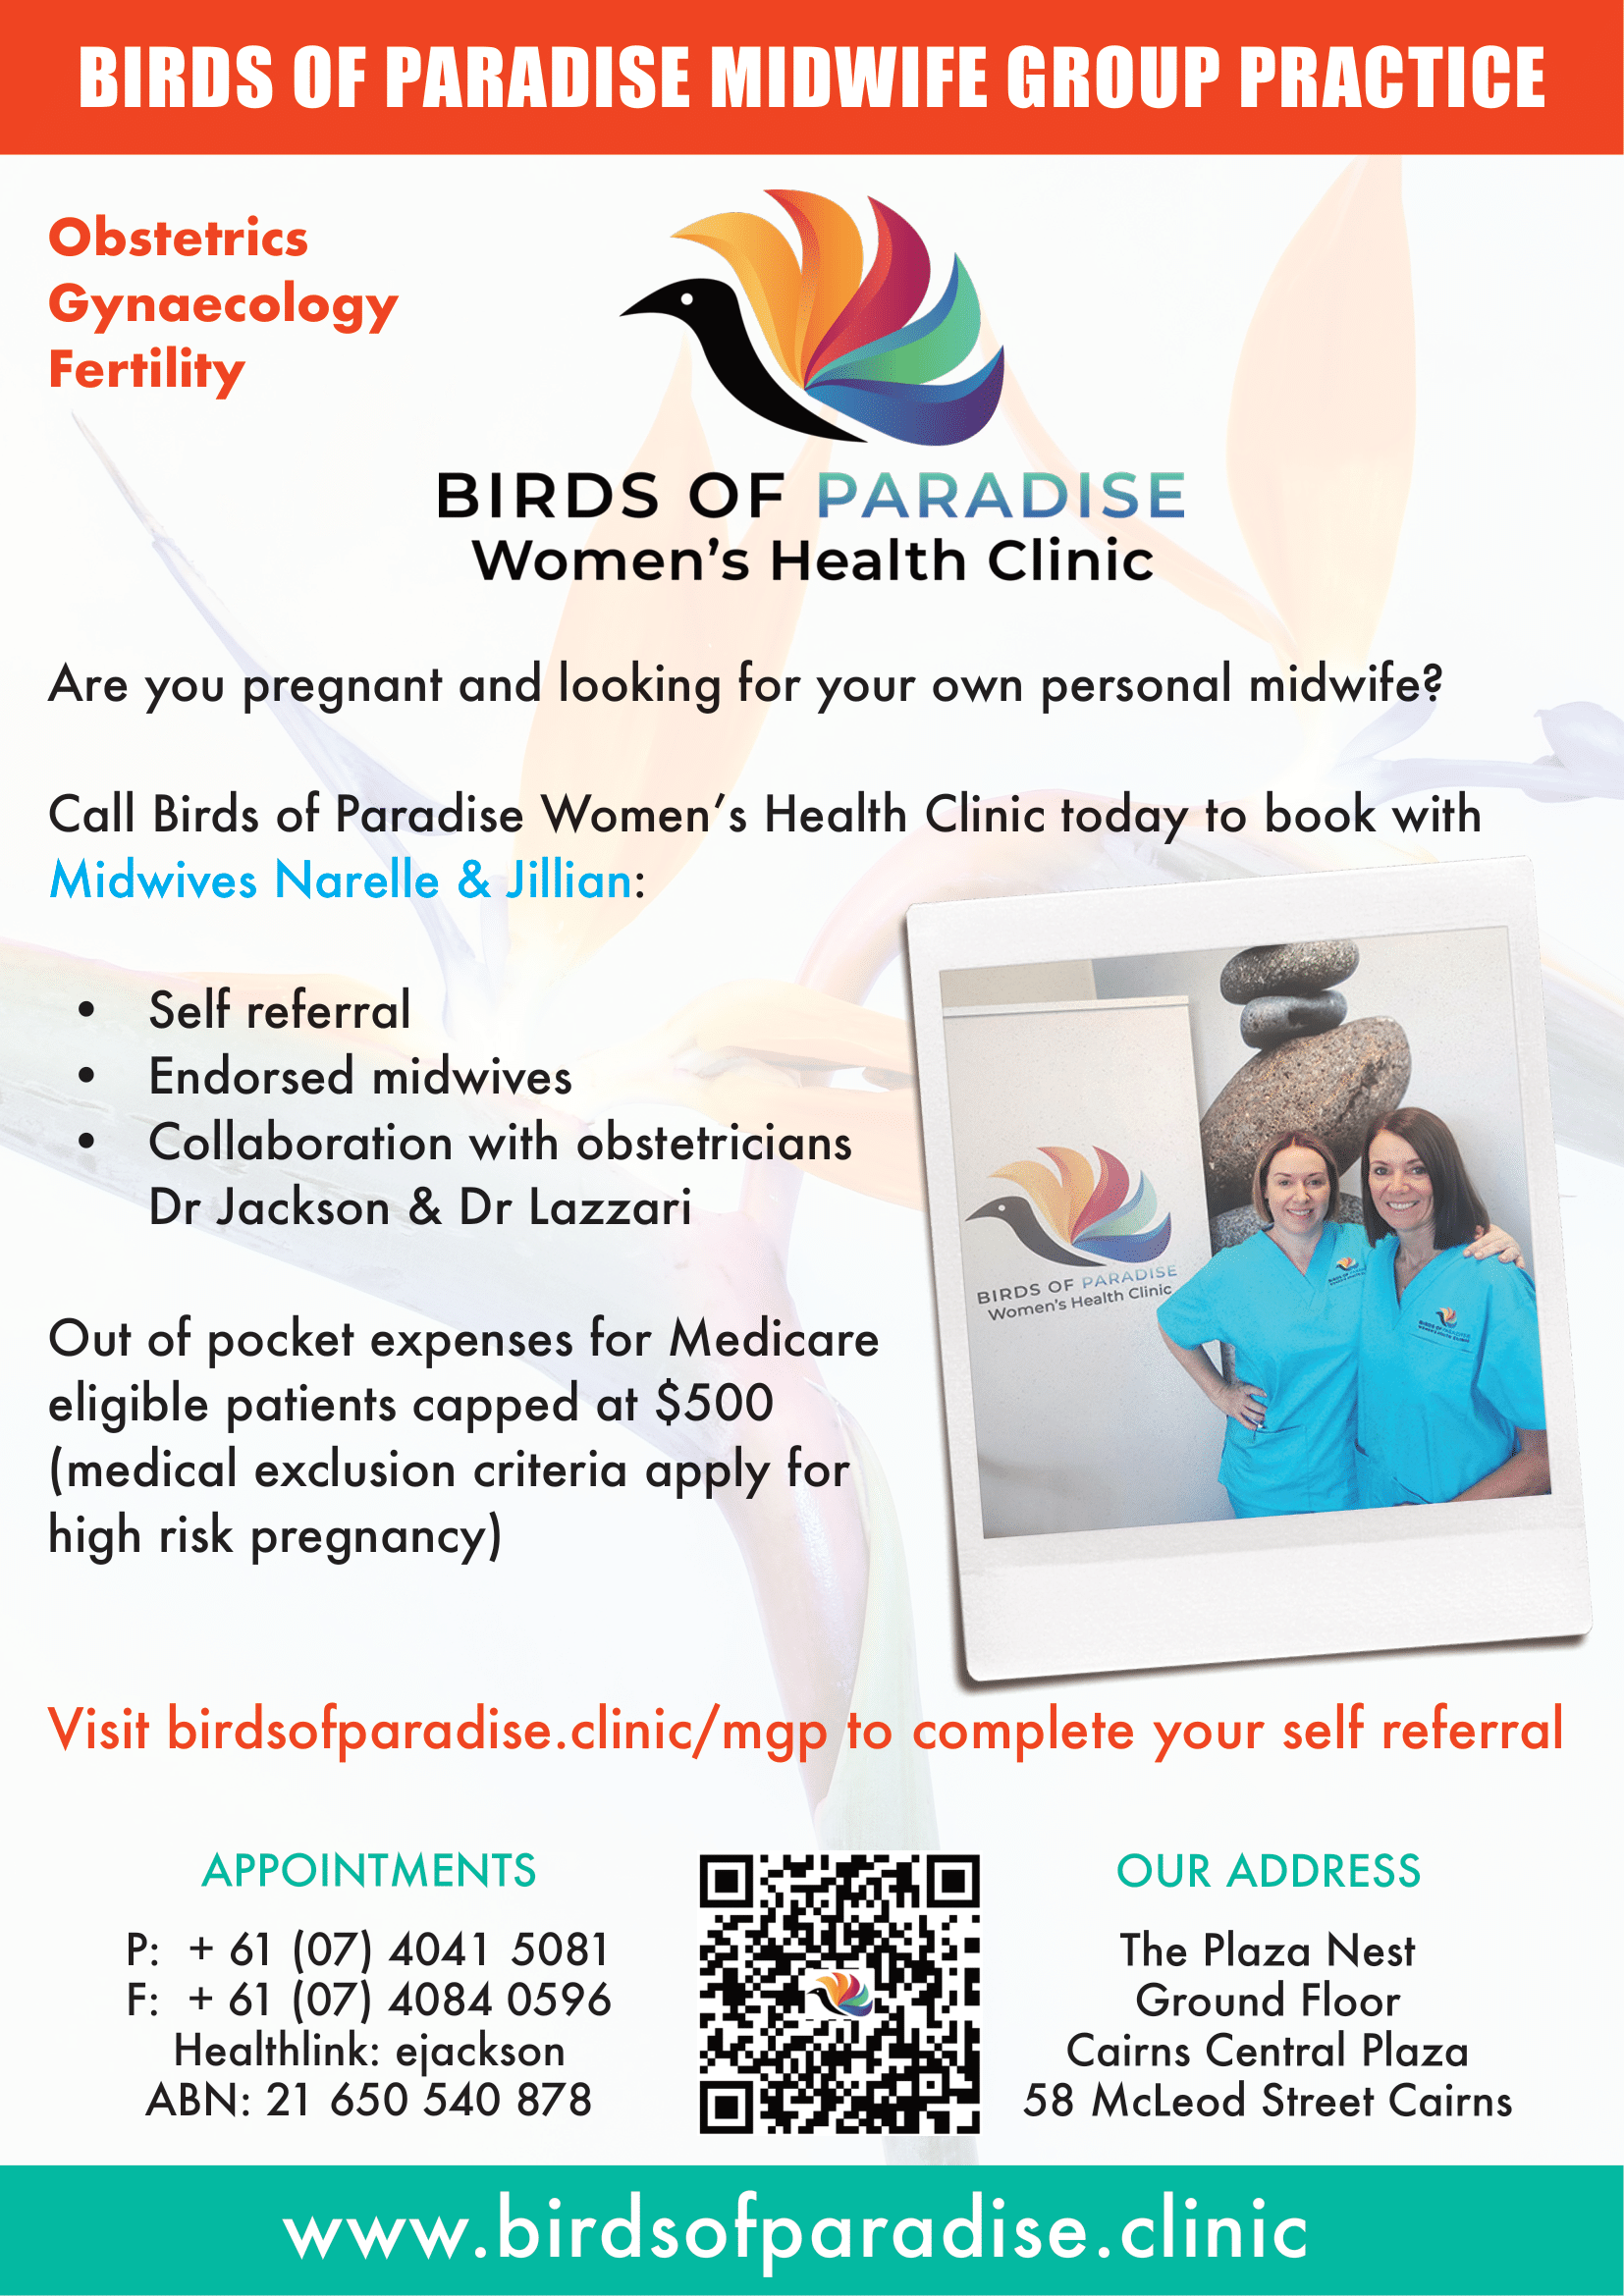 Midwife Group Practice - Birds of Paradise-1.png